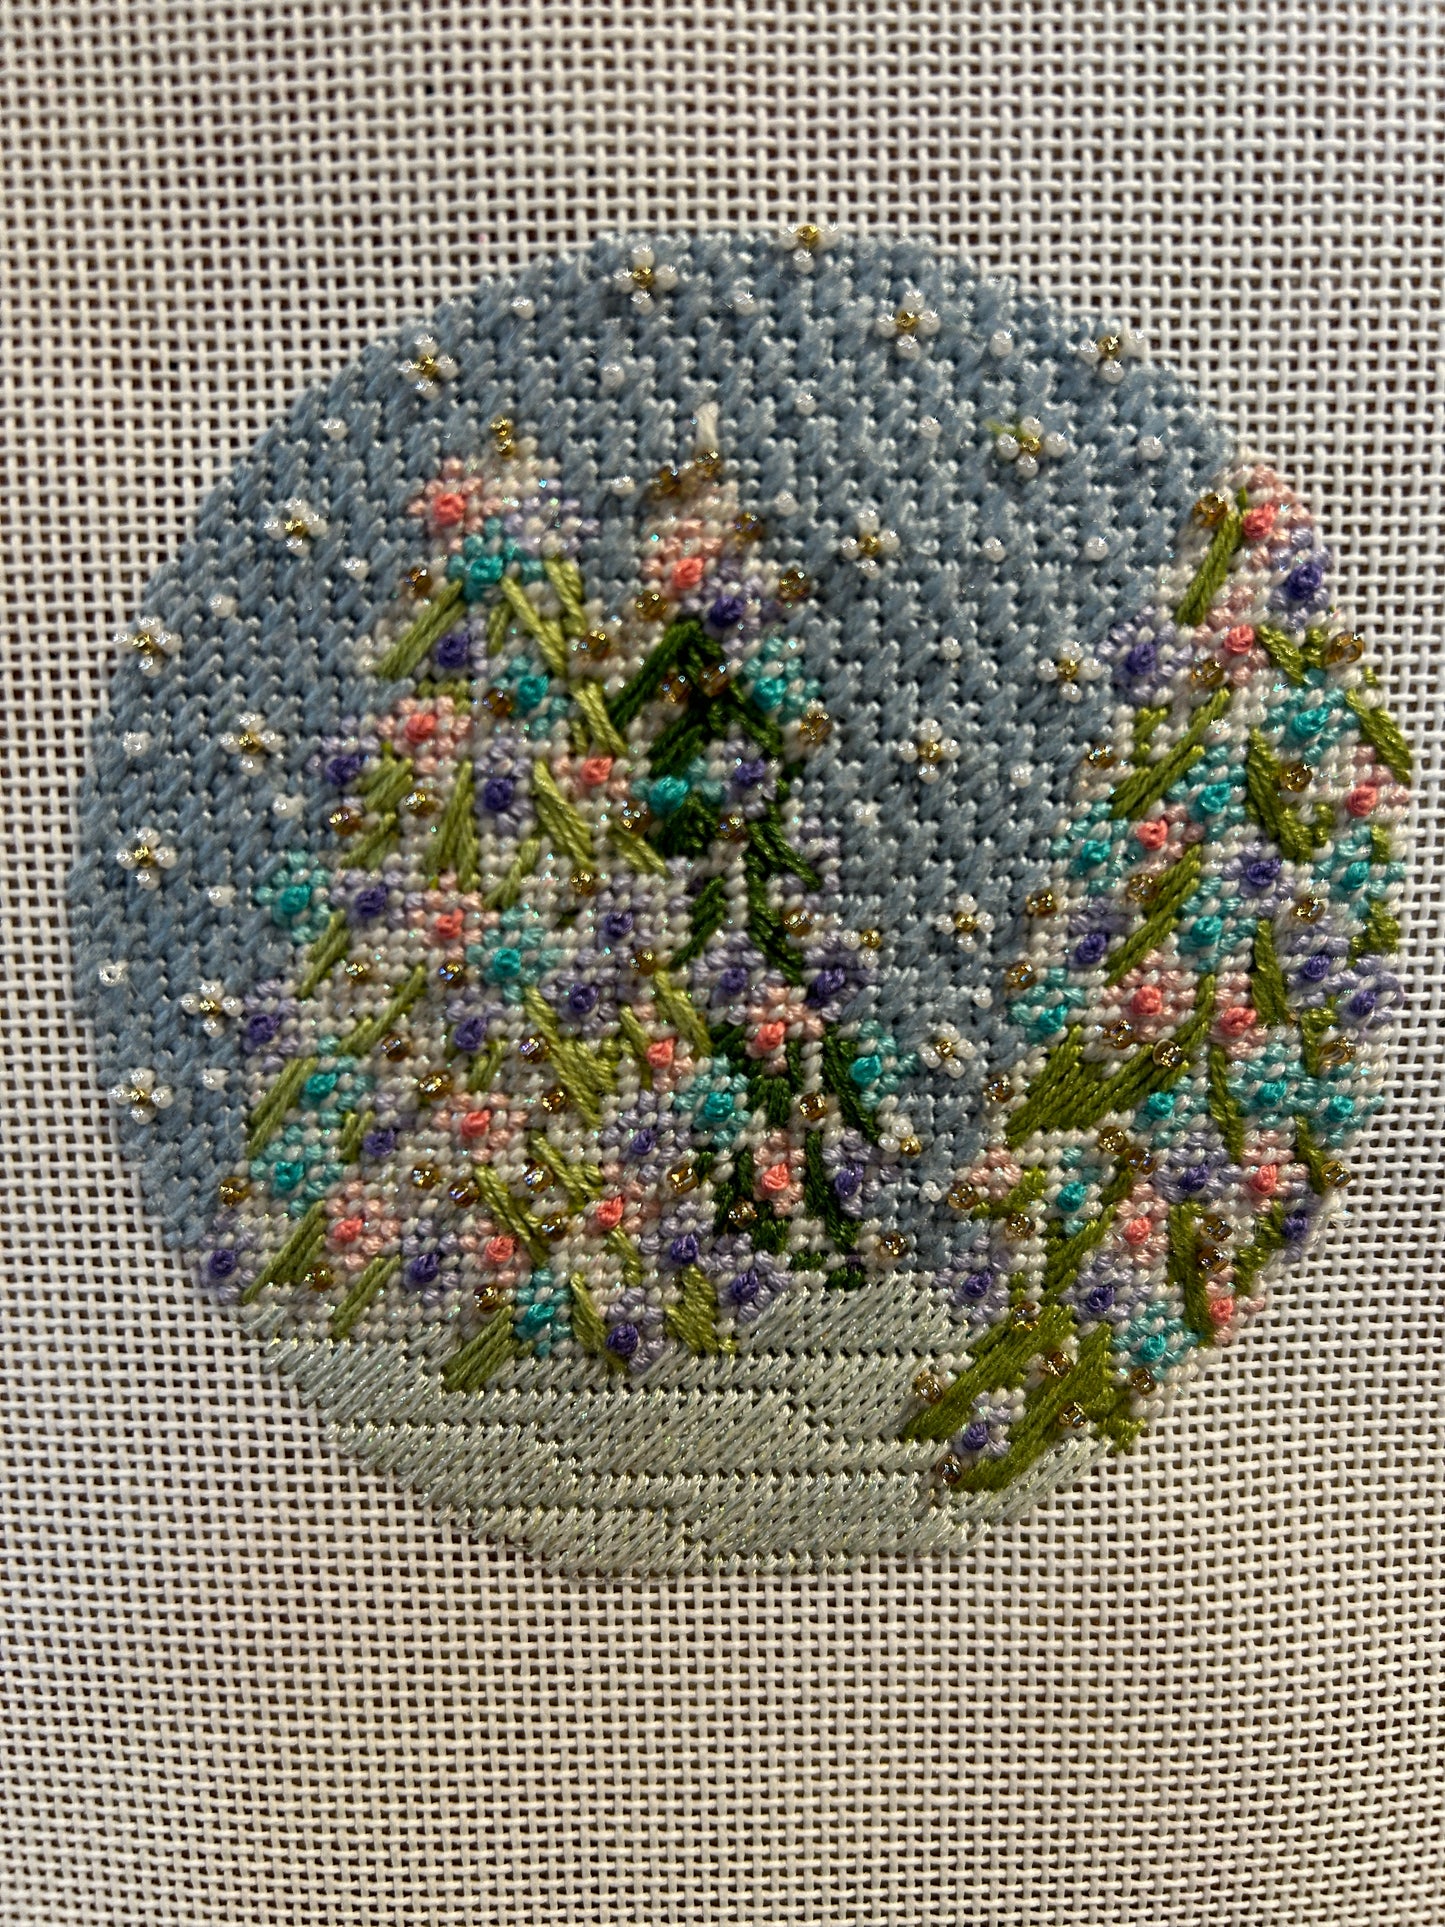 December Trees with Stitch Guide